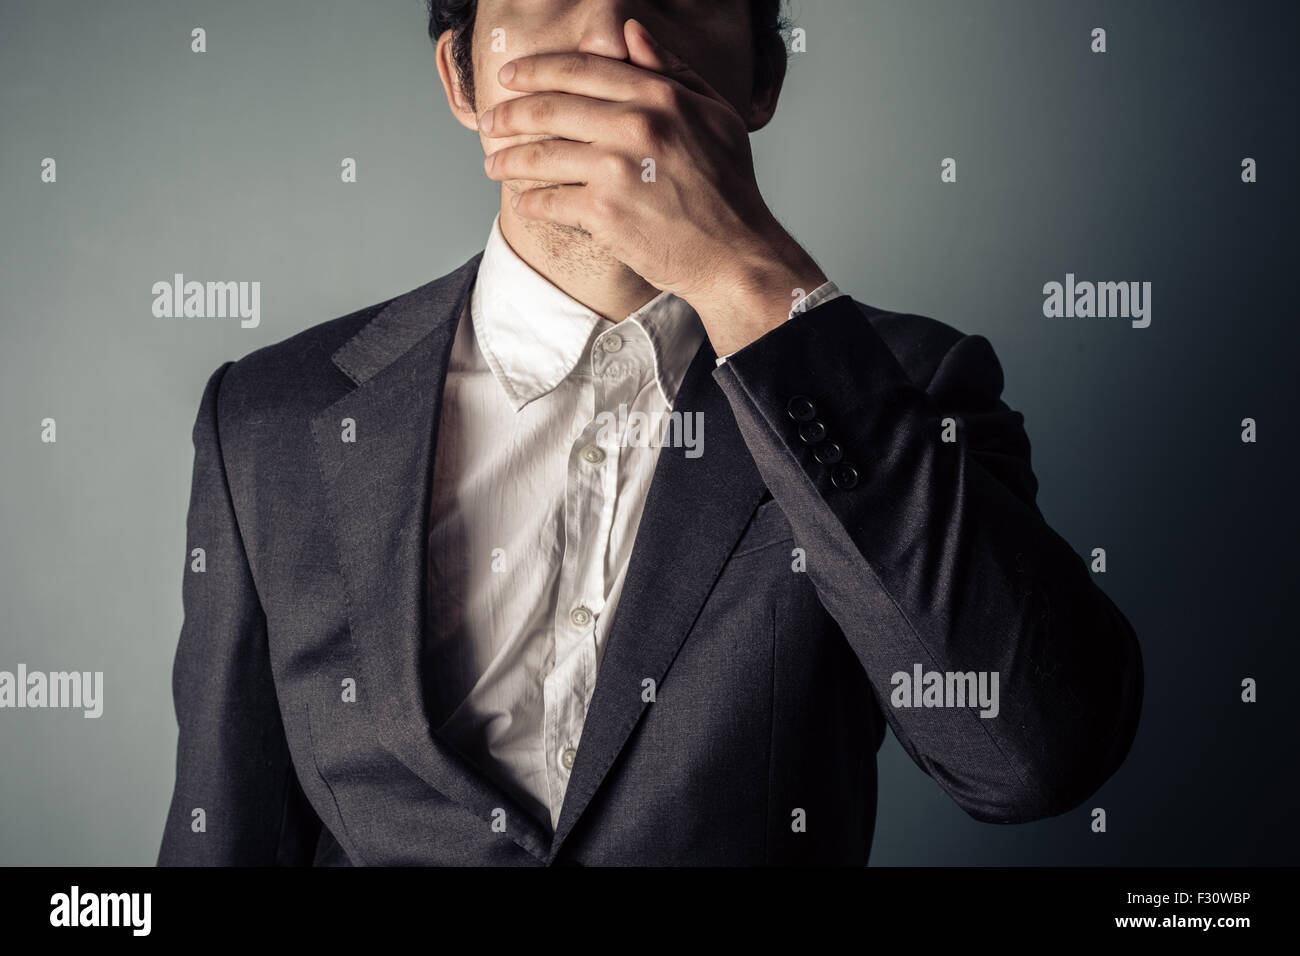 Shocked young businessman covering is mouth Stock Photo